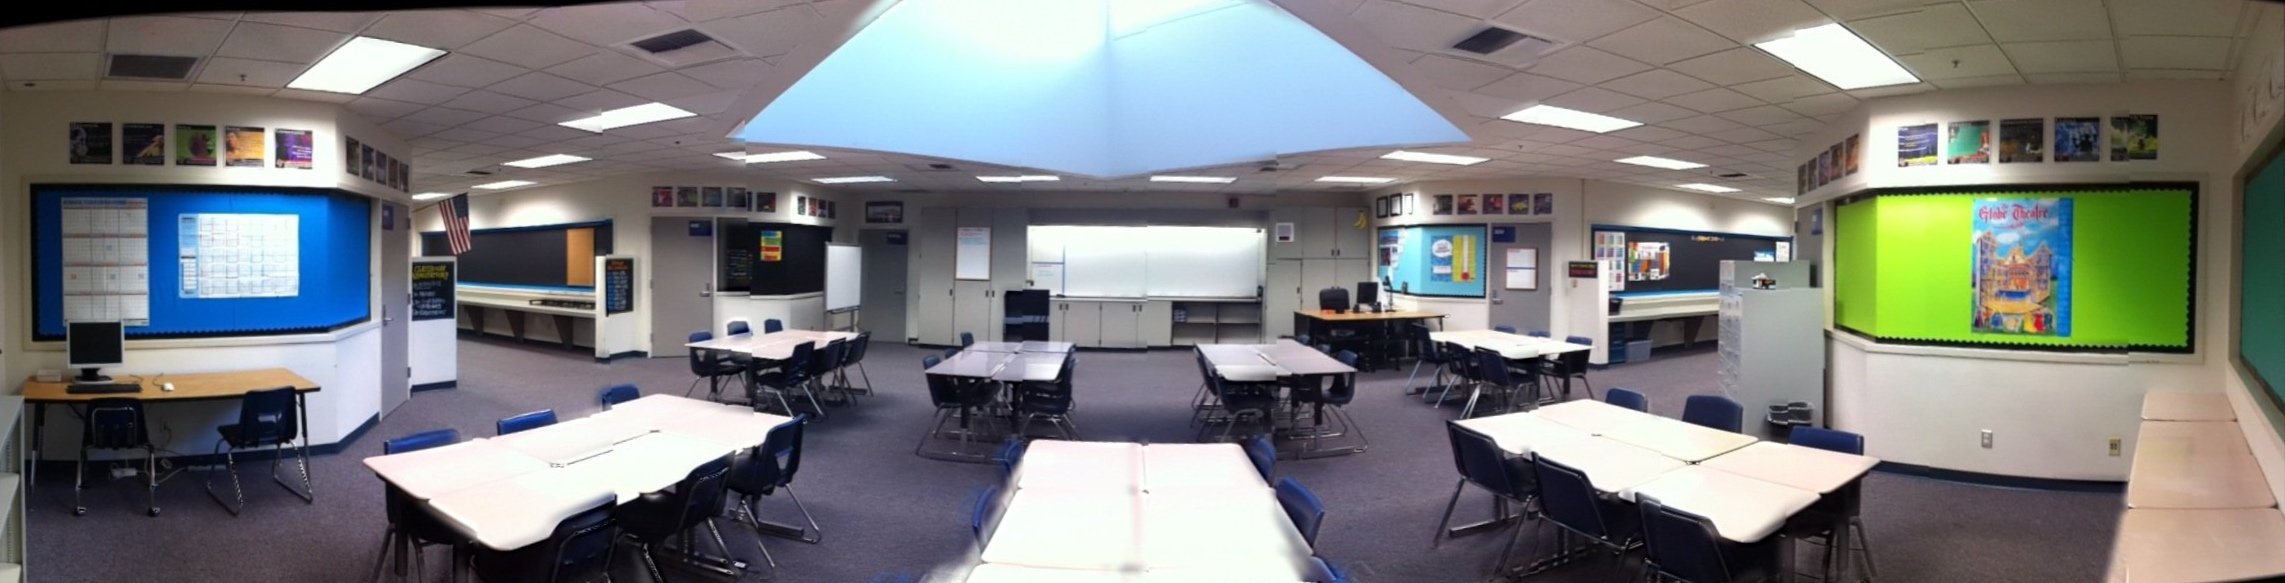  I always like rearranging rooms semi-regularly to find the best and most comfortable setup for me and the students. 